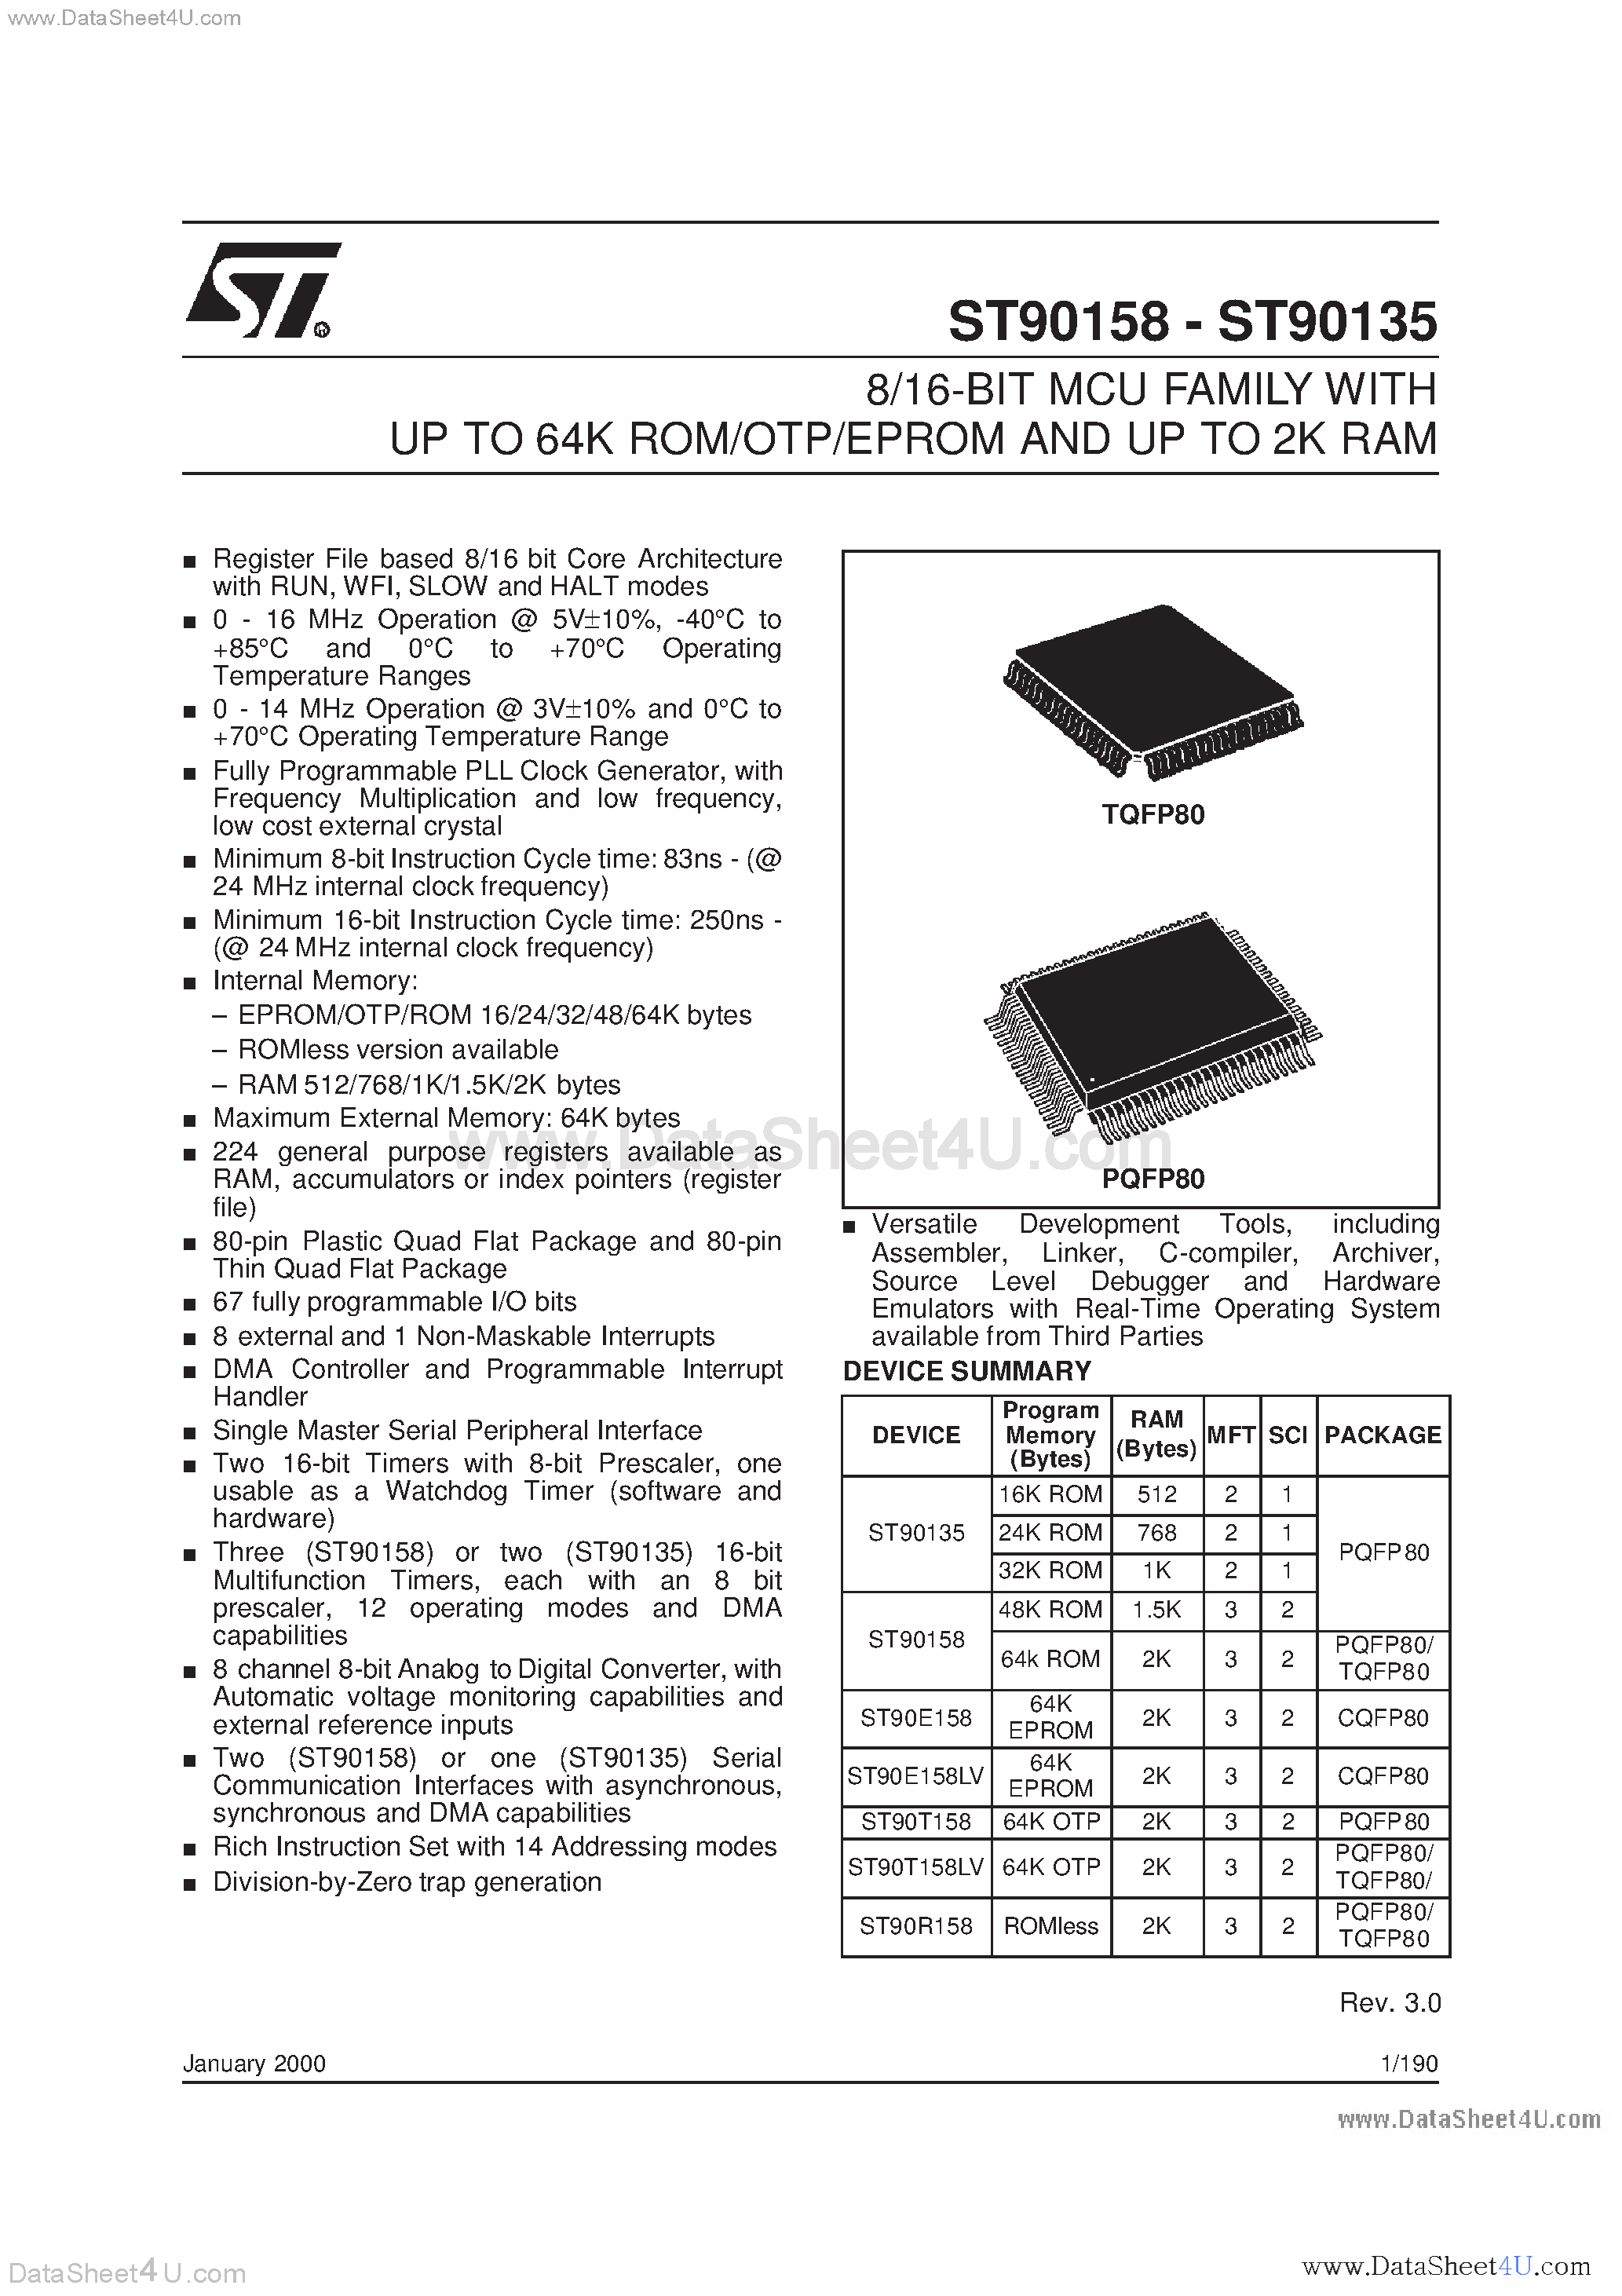 Даташит ST90E158 - 8/16-BIT MCU FAMILY WITH UP TO 64K ROM/OTP/EPROM AND UP TO 2K RAM страница 1